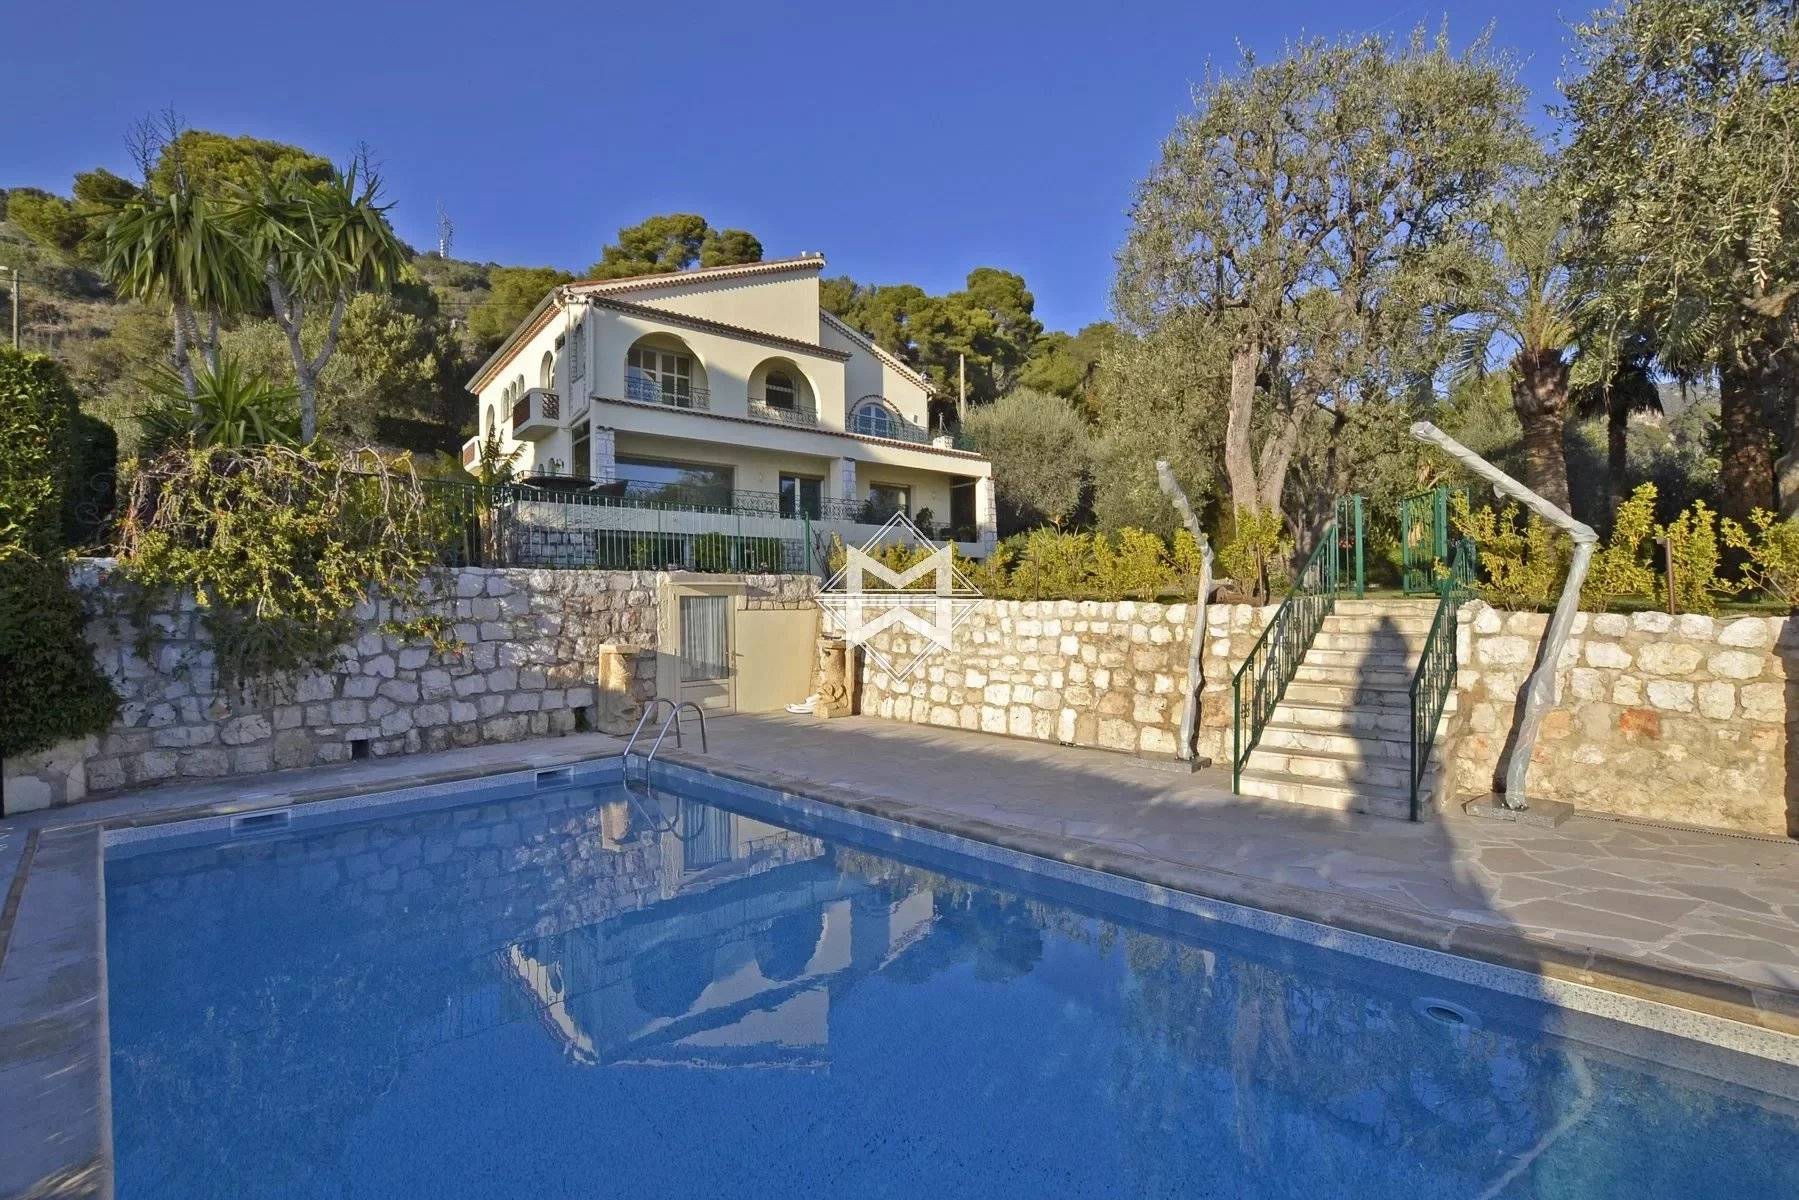 Villa located on a garden planted with olive trees, palm trees and citrus fruit trees of approx. 1 583 sqm, with a living space of about 400 sqm on 3 levels, south facing